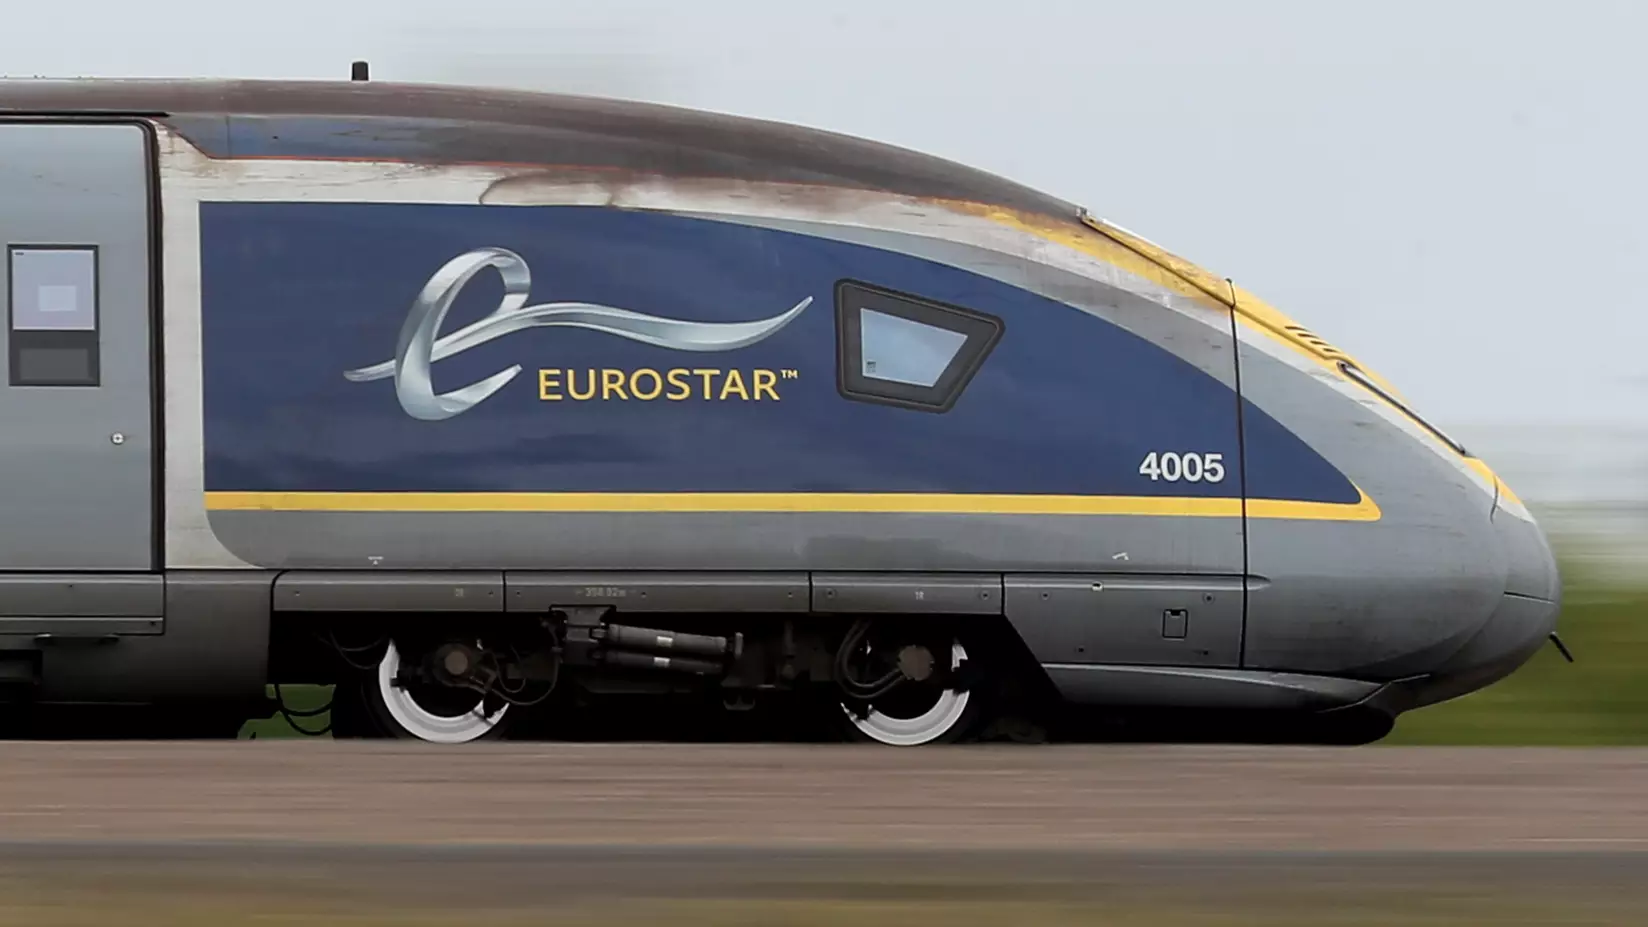 Eurostar Selling £29 Tickets To Paris And Brussels